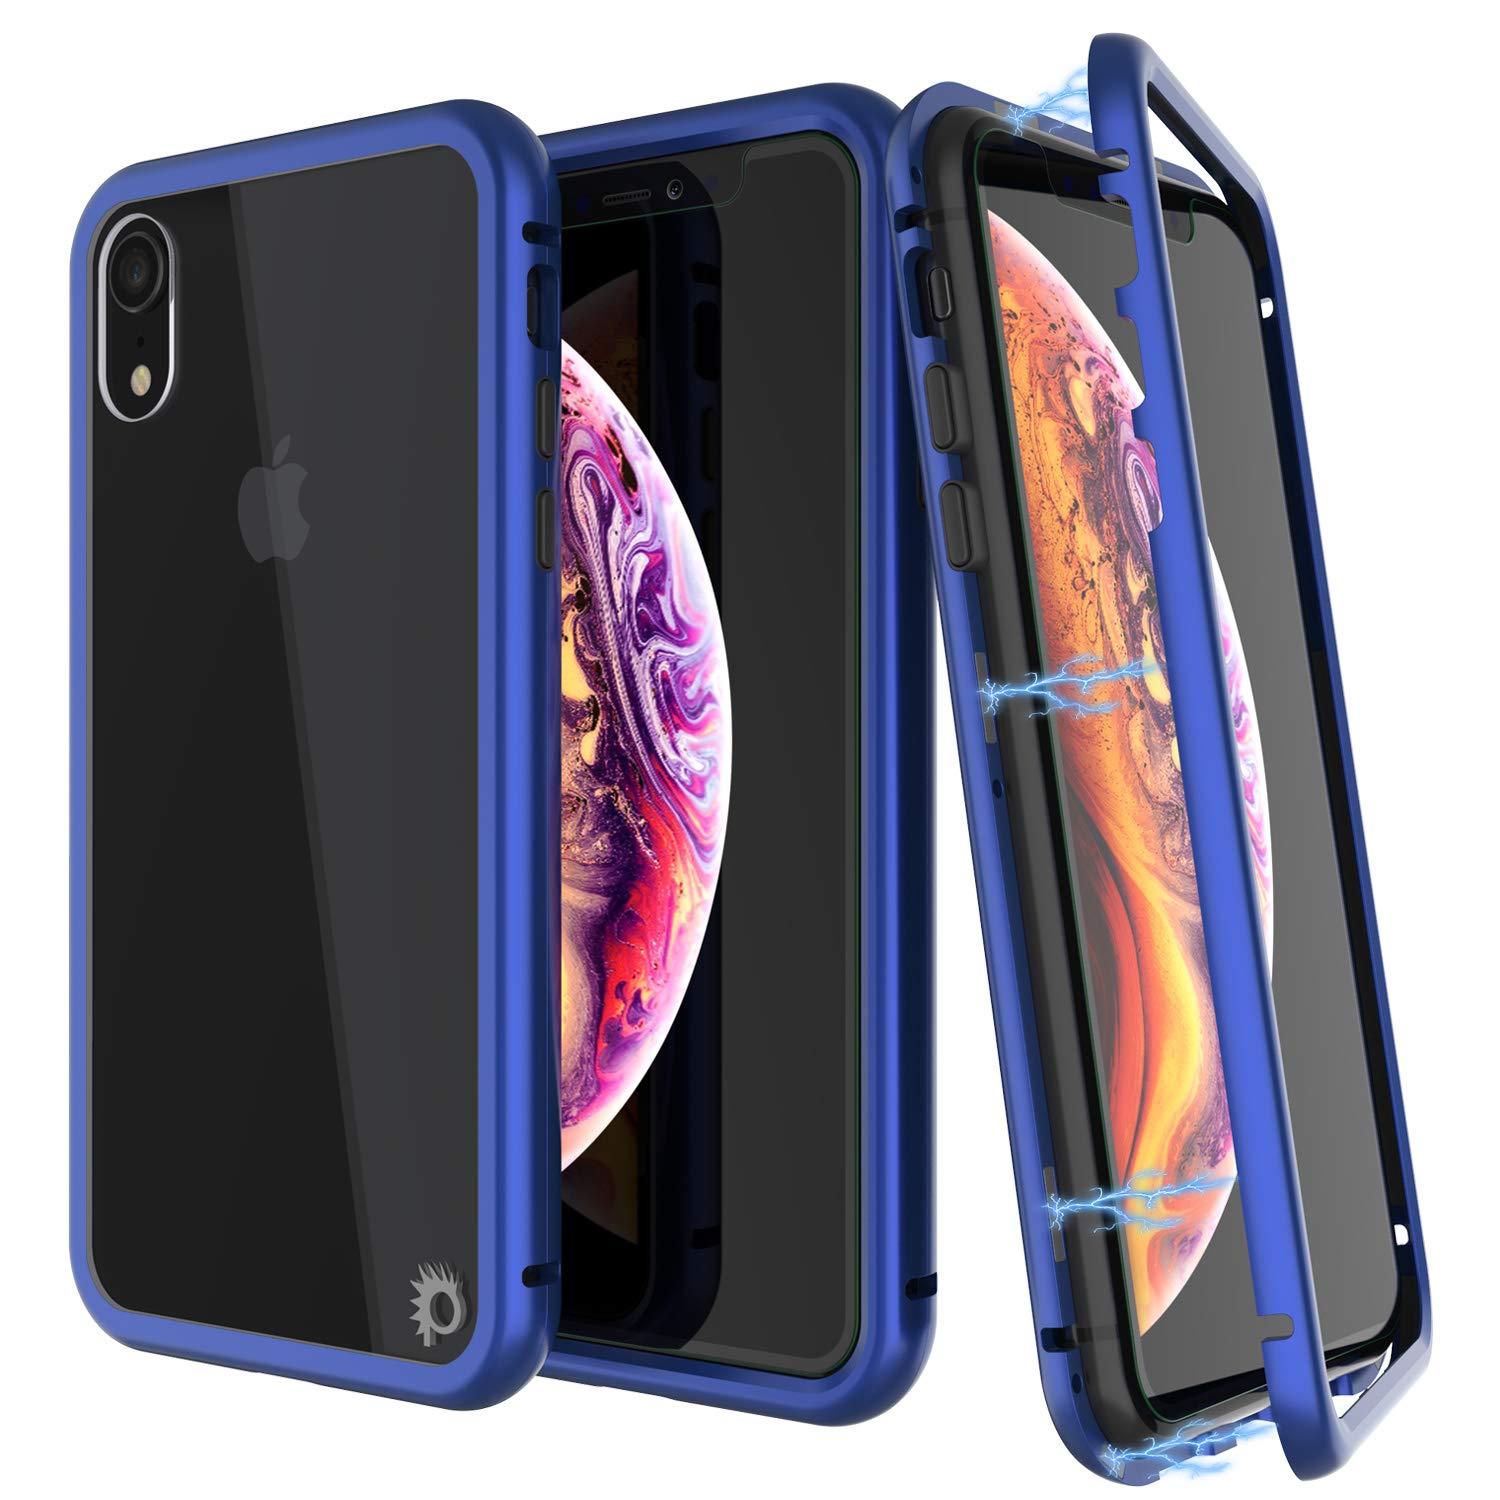 iPhone XR Case, Punkcase Magnetic Shield Protective TPU Cover W/ Tempered Glass Screen Protector [Blue]